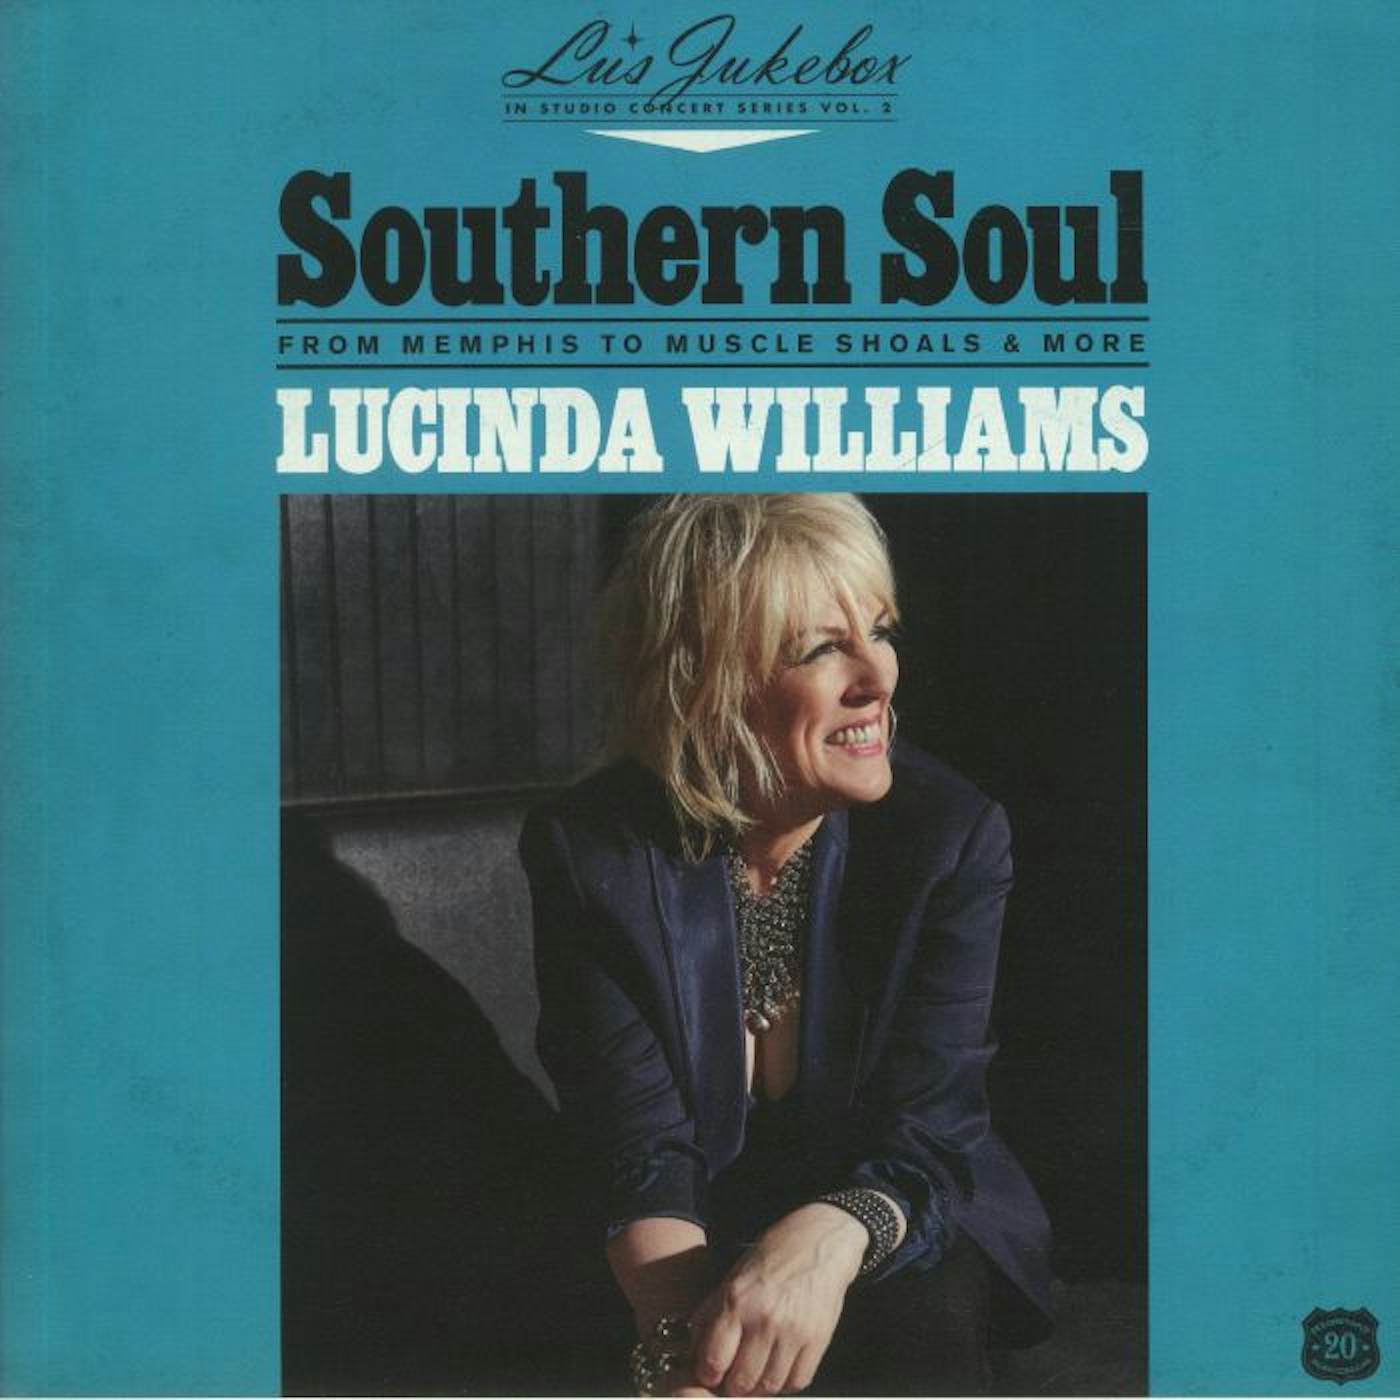 Lucinda Williams LP Vinyl Record - Lus Jukebox Vol. 2: Southern Soul: From Memphis To Muscle Shoals